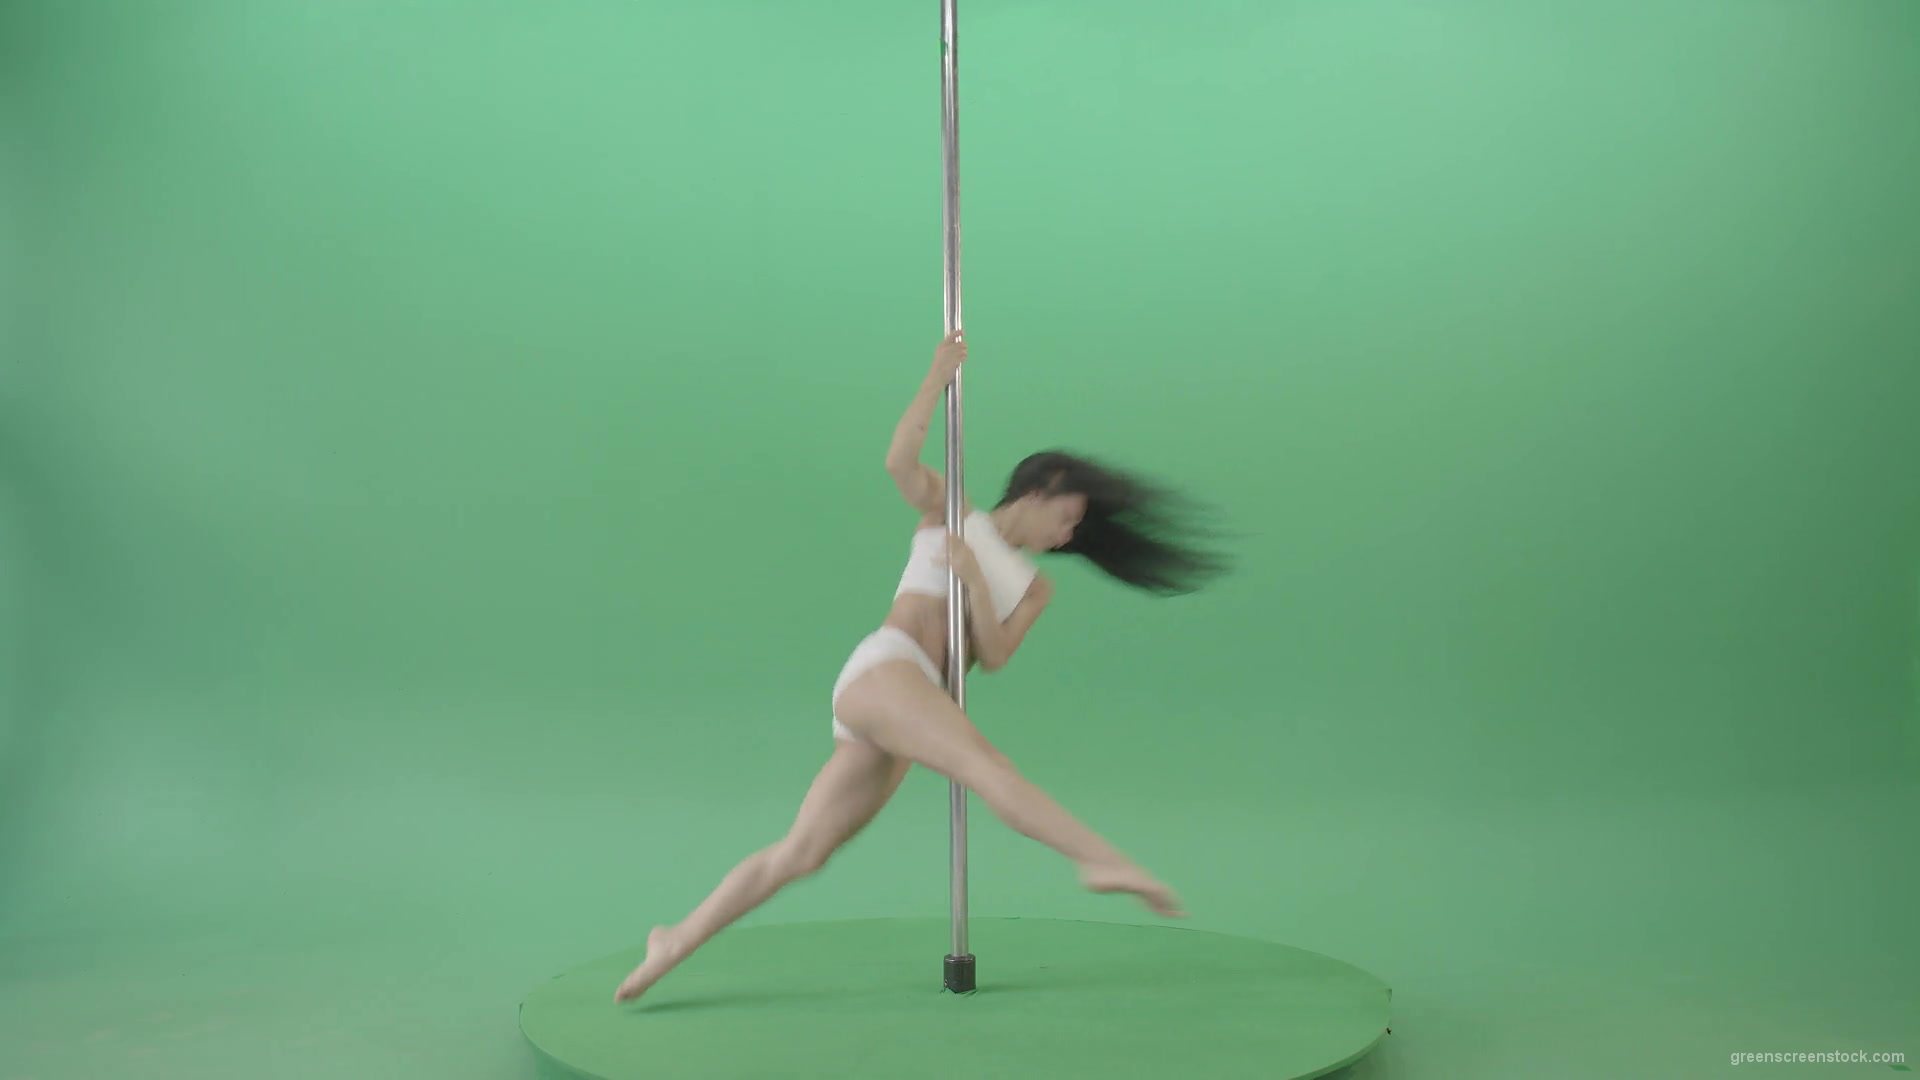 Go-Go-Girl-in-white-dress-spinning-on-the-pole-and-sit-on-a-twine-on-green-screen-4K-Video-Footage-1920_007 Green Screen Stock